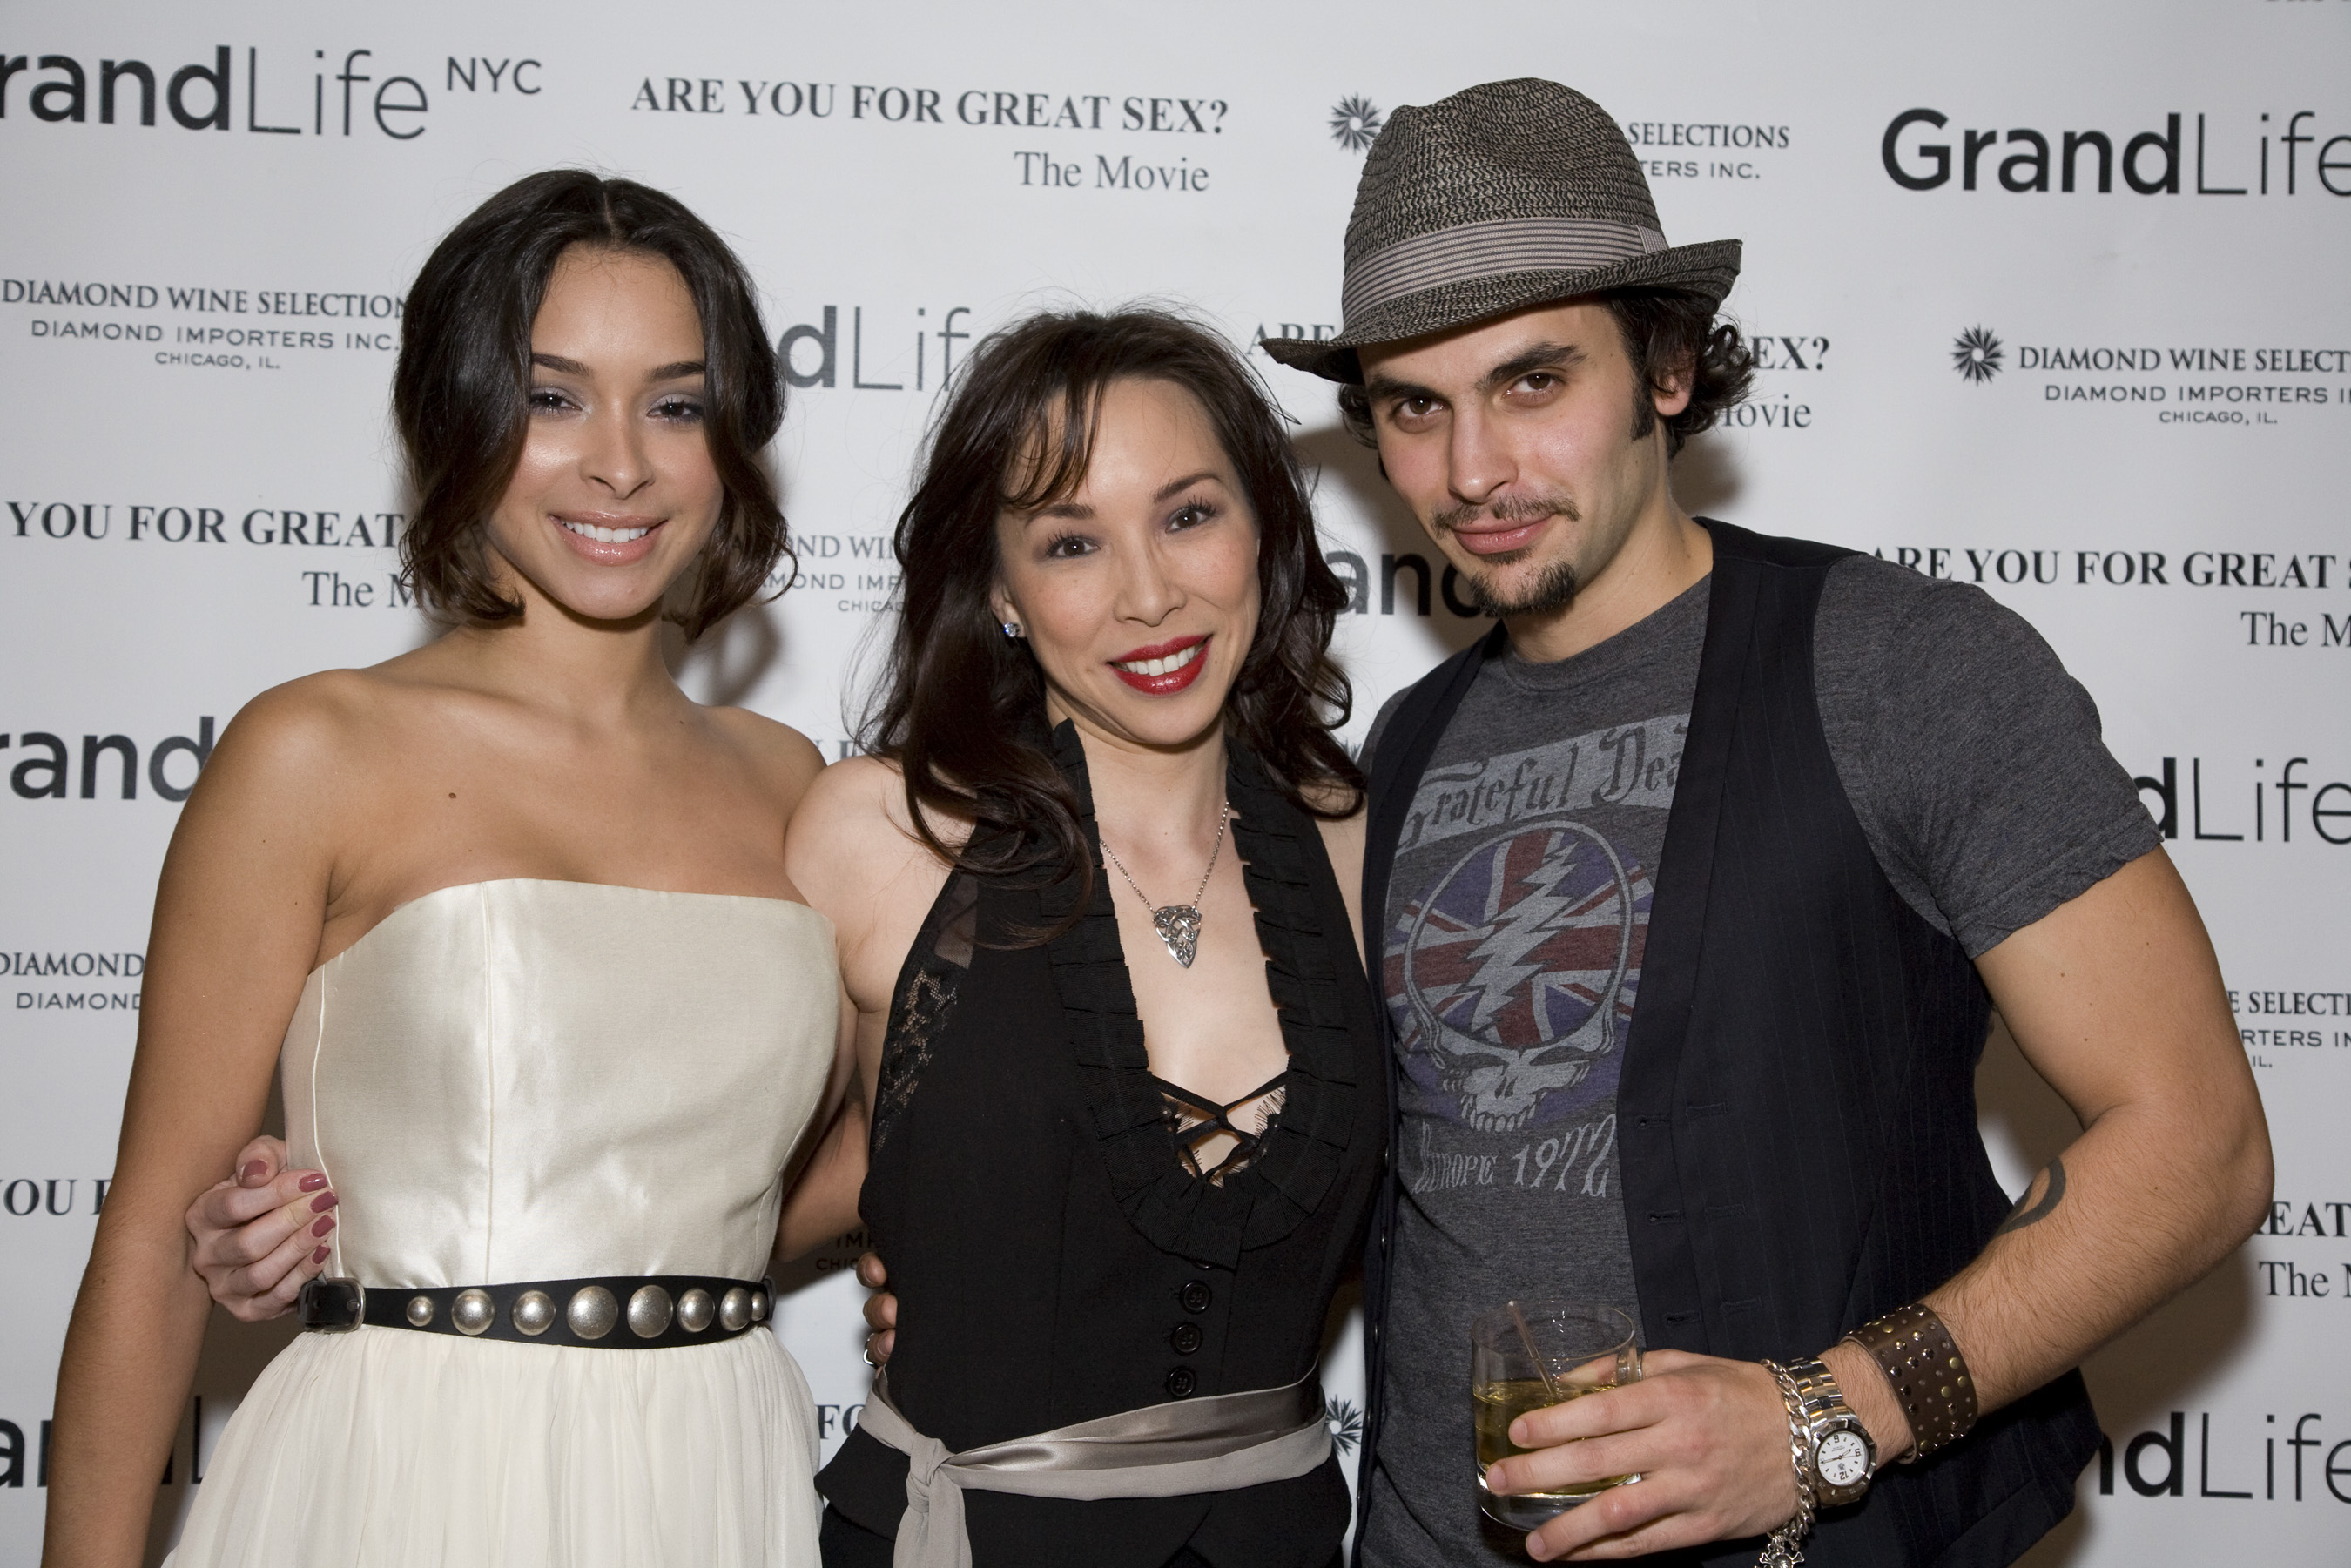 Director, Writer Cynthia Hsiung with actors Jessica Caban and Walter Vincent at the TriBeCa Grand Hotel private screening, New York City